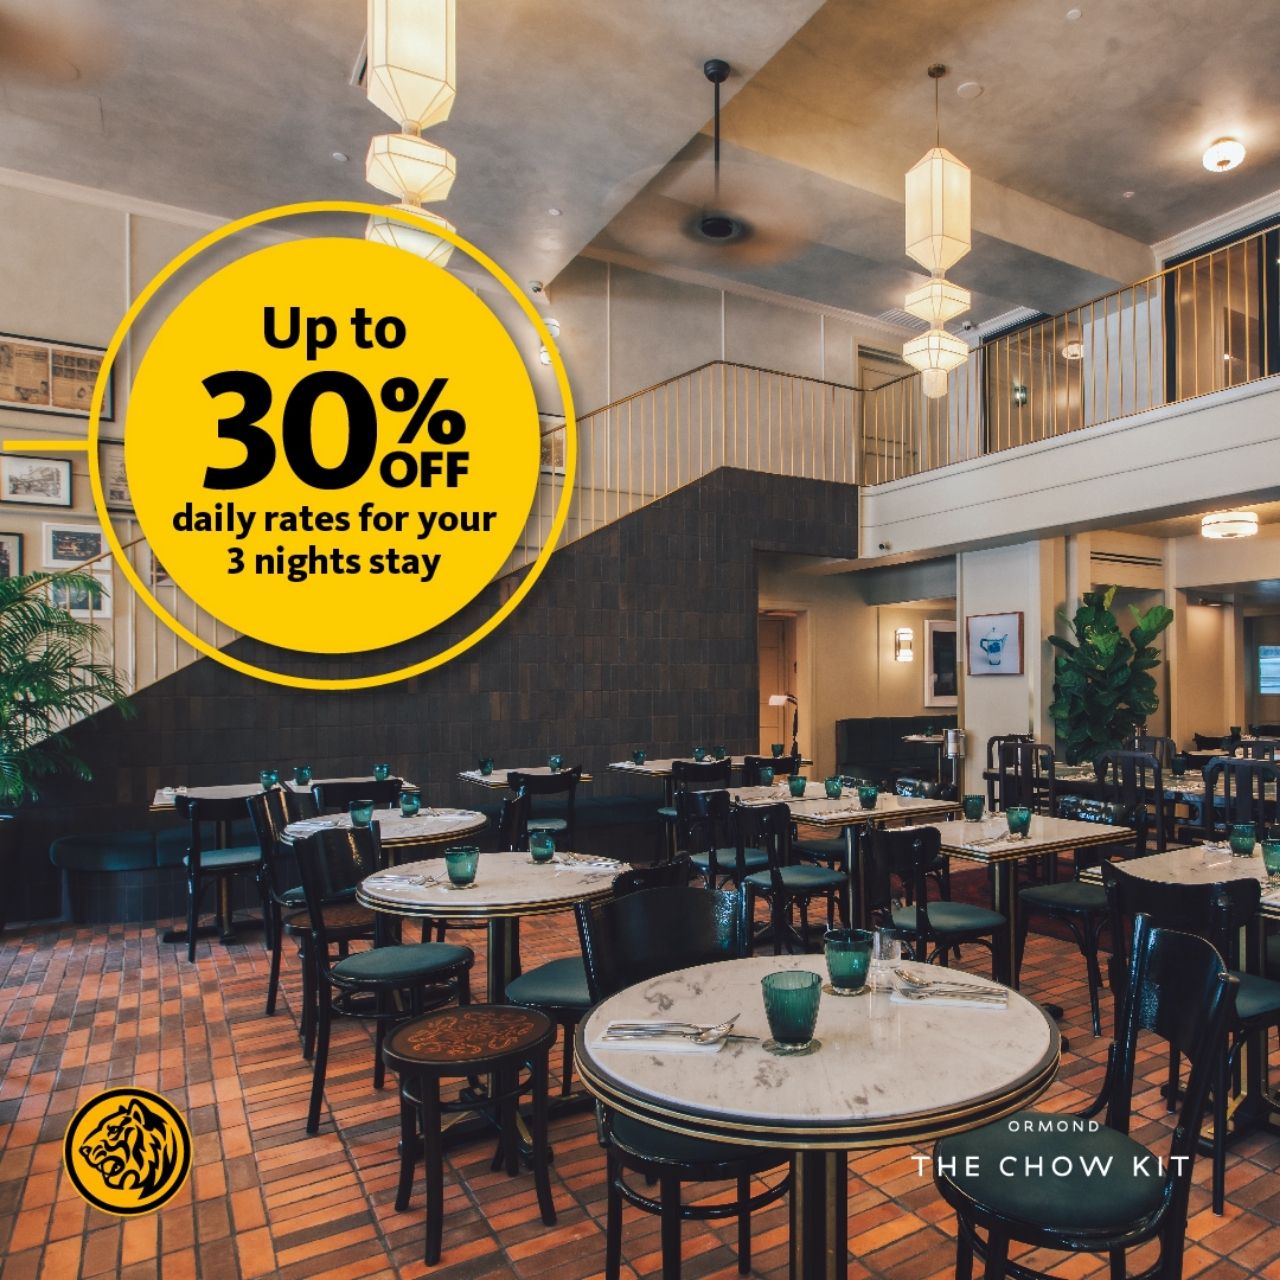 Up to 30% OFF at The Chow Kit – an Ormond Hotel